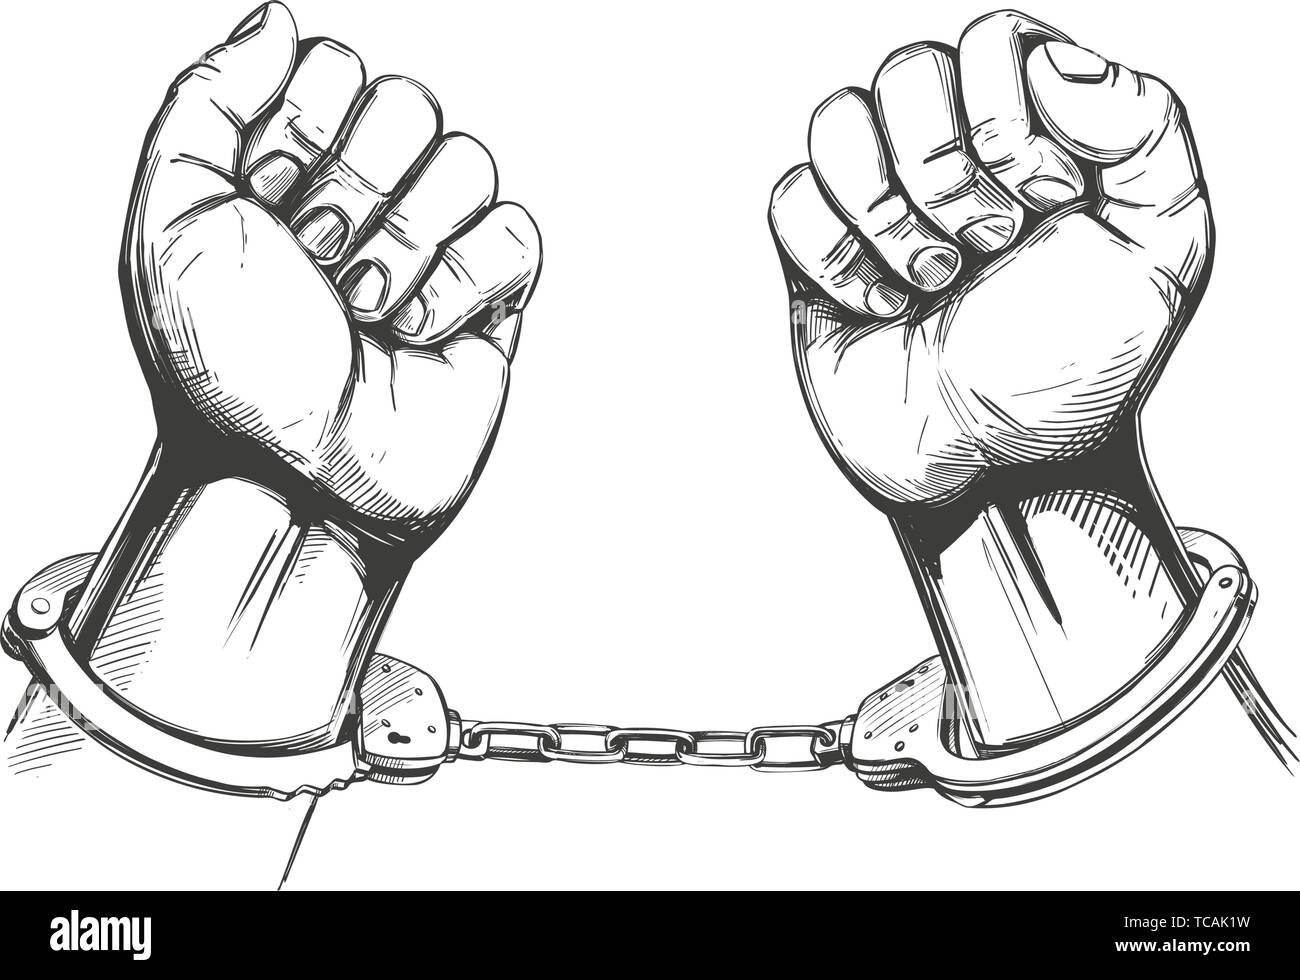 Handcuffed Hands Icon Hand Drawn Vector Illustration Sketch Stock Vector Image Art Alamy